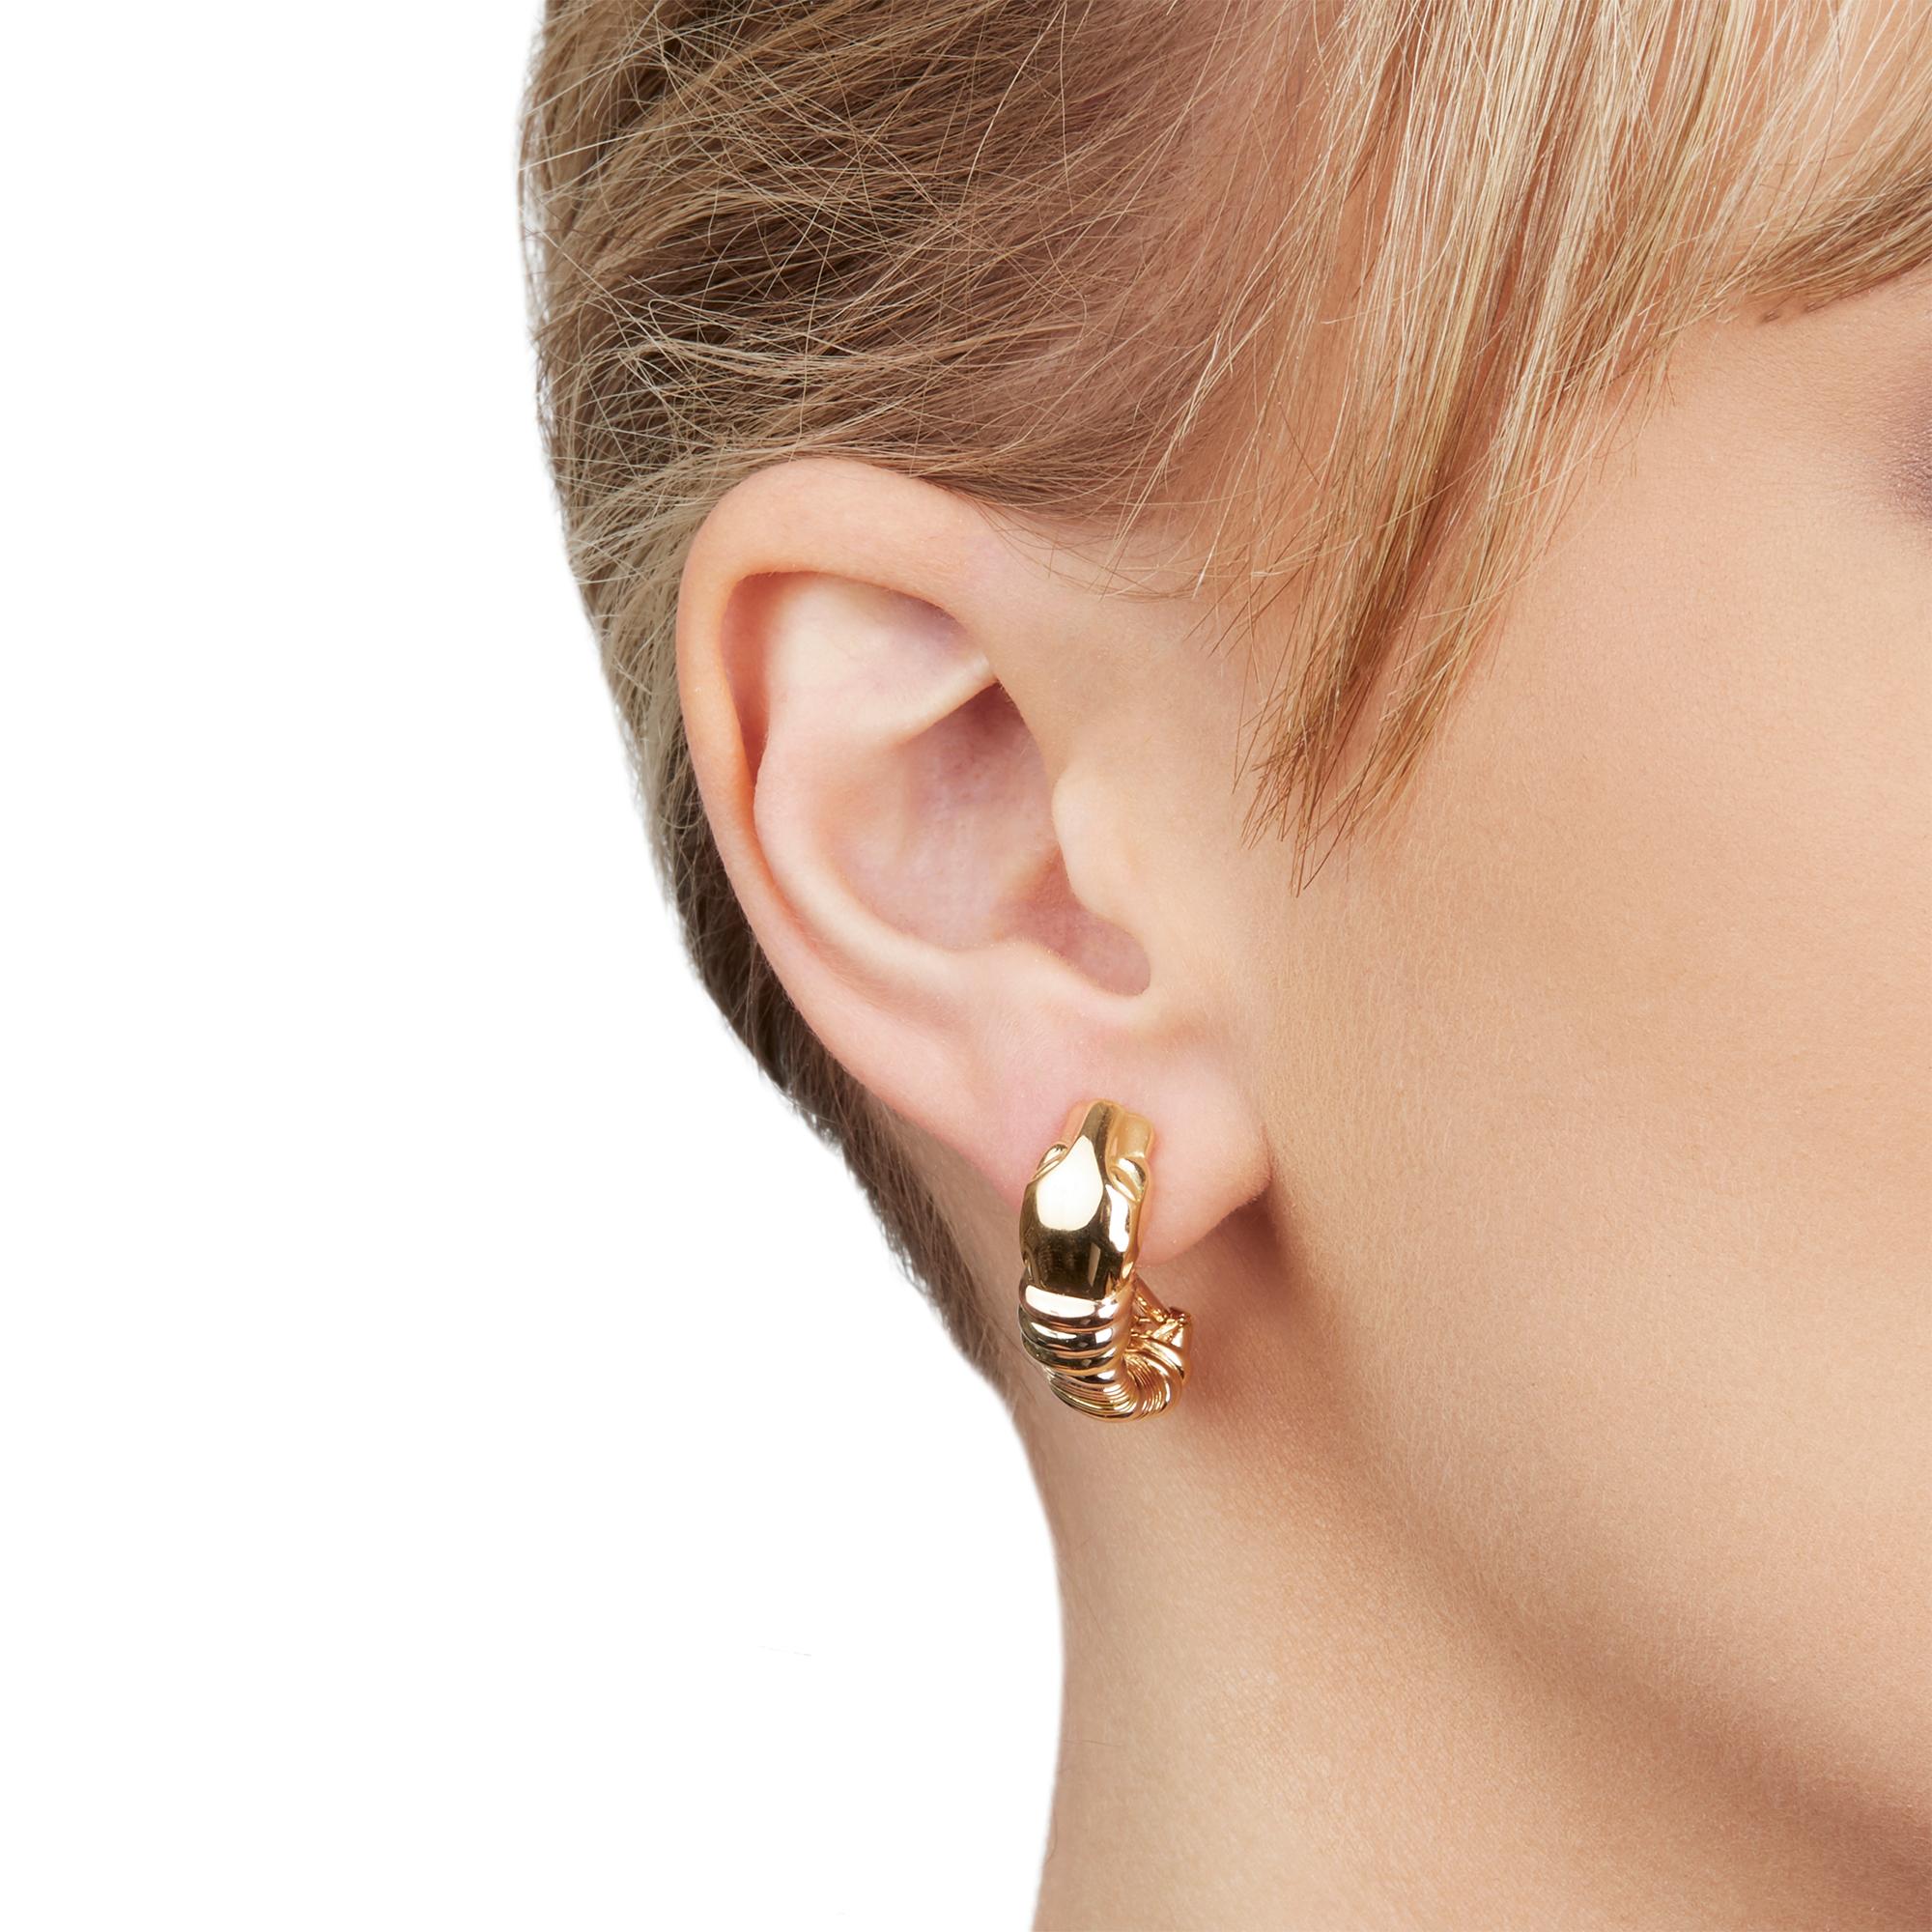 These Earrings by Cartier are from their Panthère collection and feature their signature Panthère design made in 18k Yellow, White & Rose Gold. The Earring length 2.5cm and the width is 8mm. These Earrings have secure lever backs. Complete with